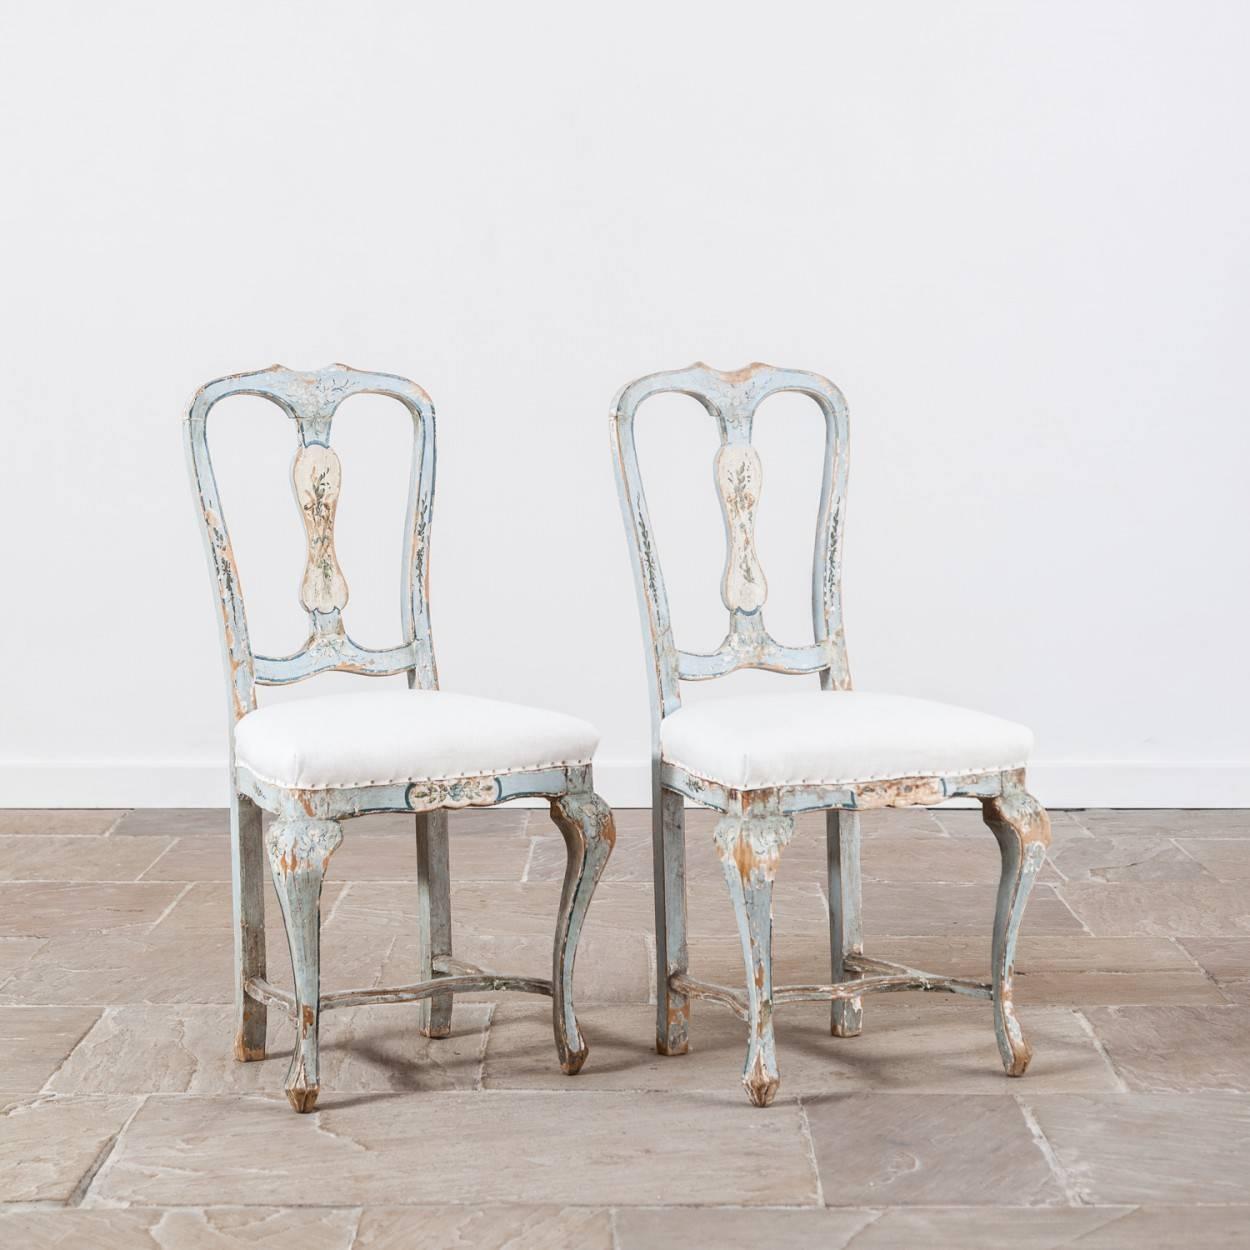 Charming pair of original painted Florentine side chairs, circa 1800. They have been newly upholstered.

Measures: 95cm high, 47cm wide and 39cm deep.